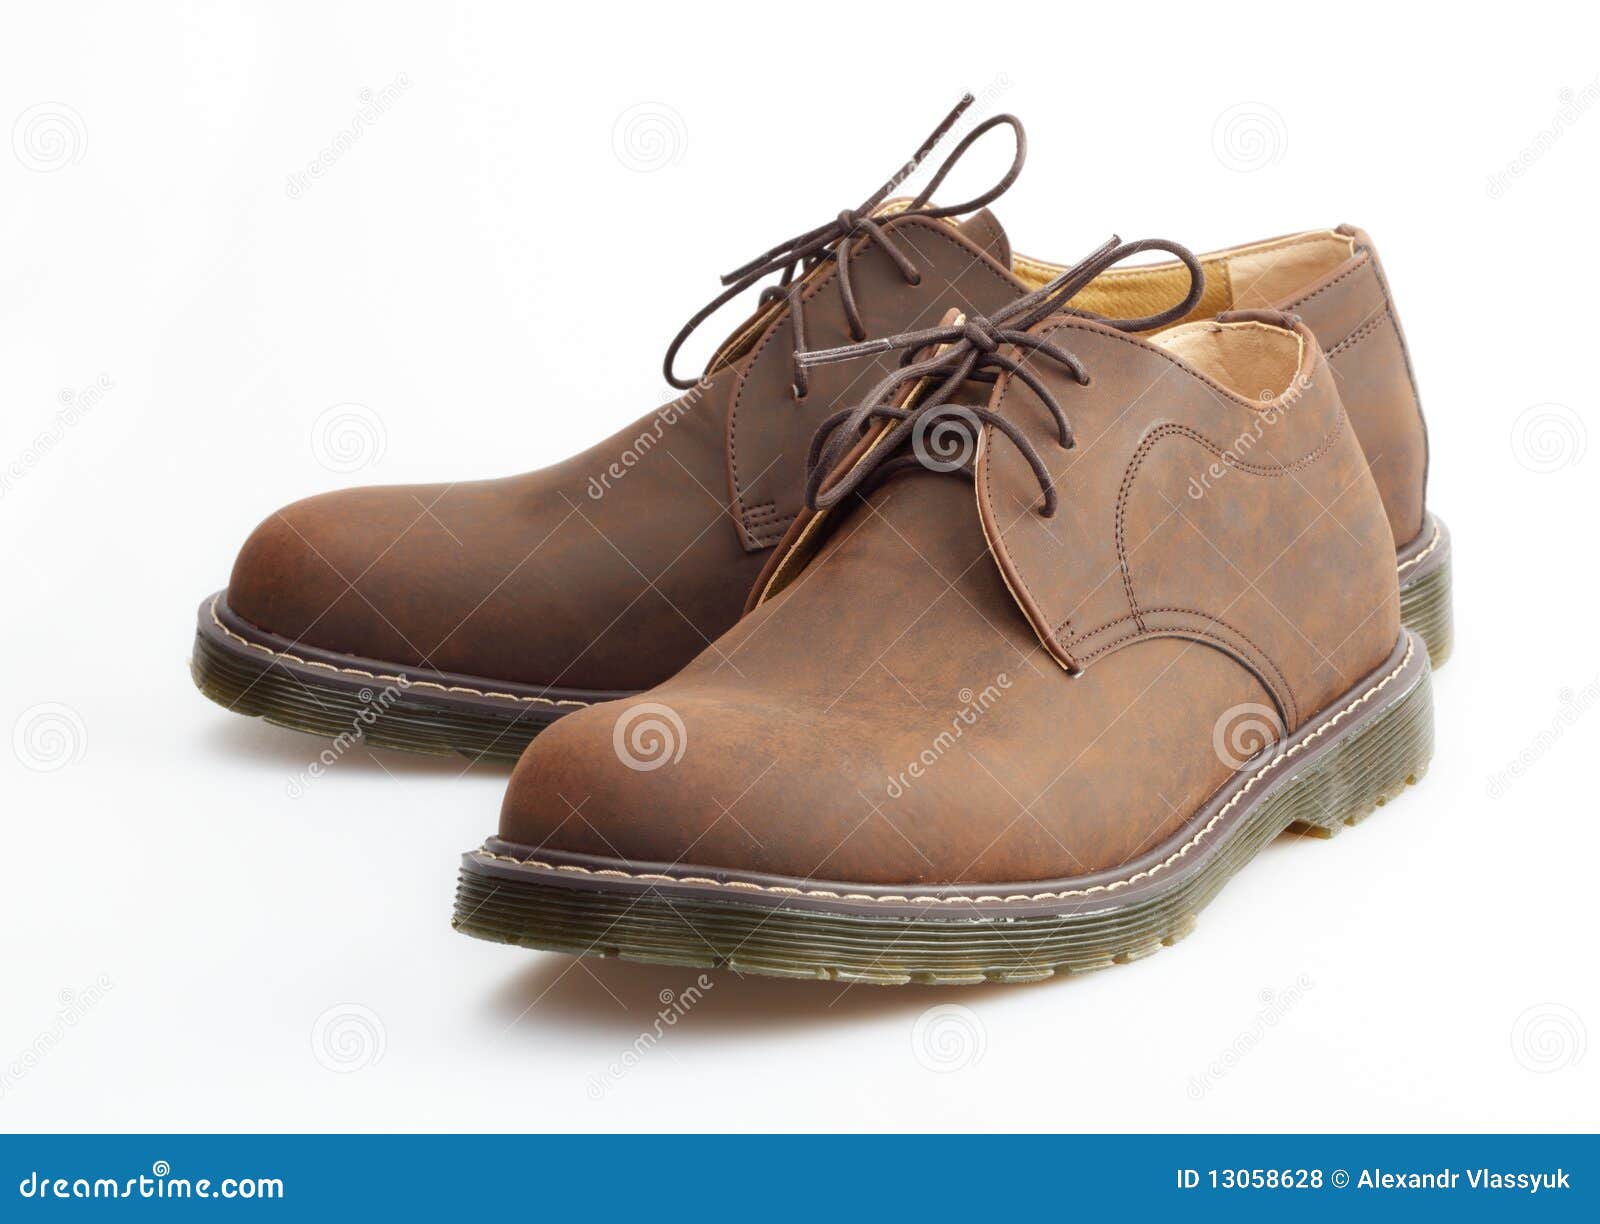 Man s boots stock photo. Image of shoes, brogues, shoelace - 13058628